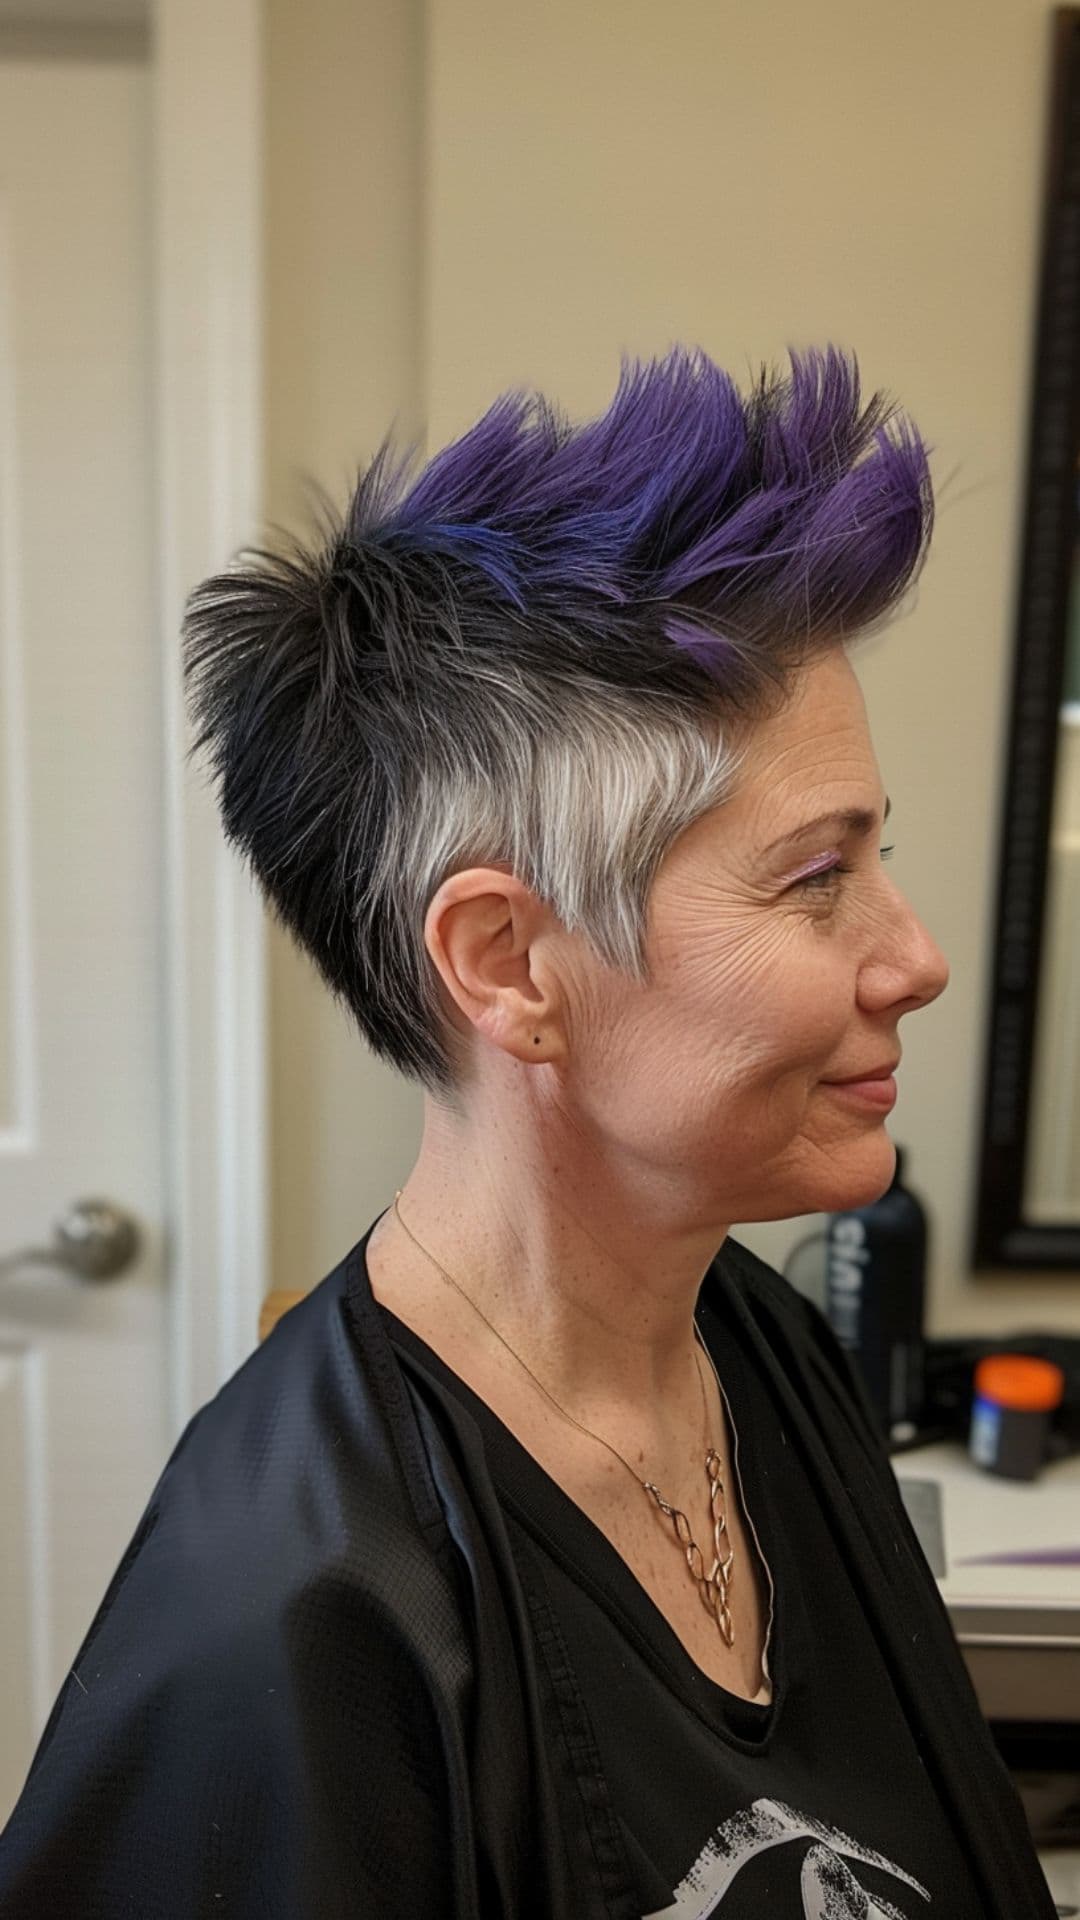 An old woman modelling a faux hawk with purple highlights.